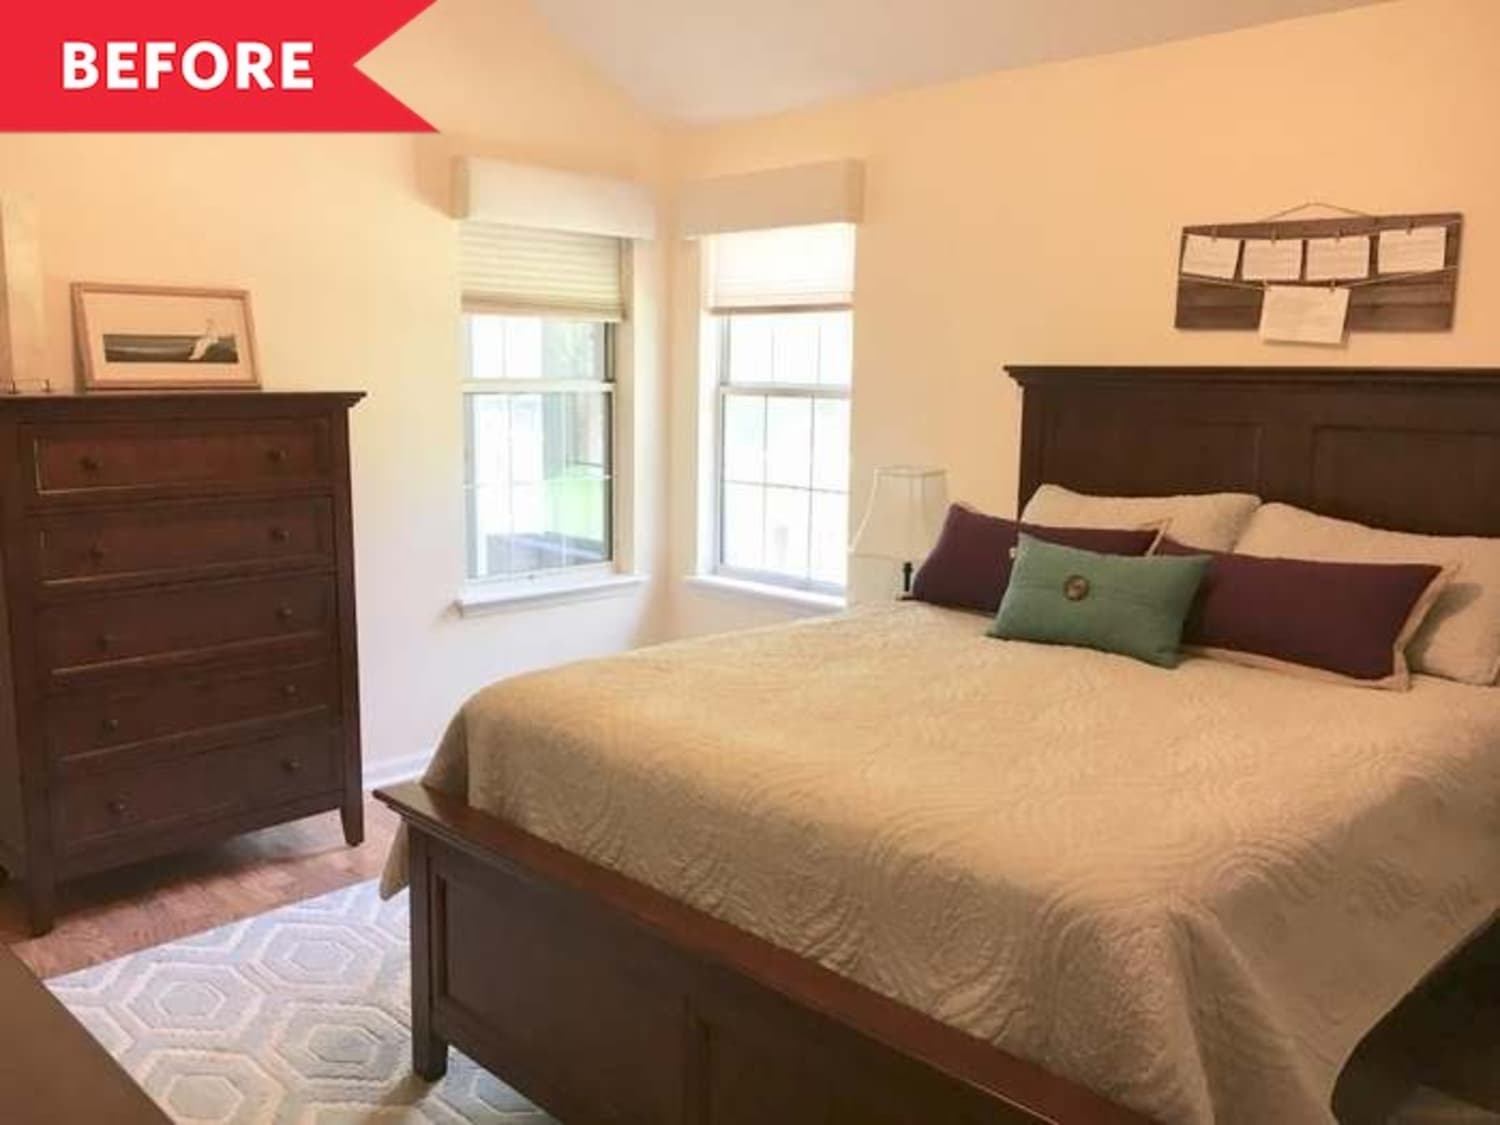 Before and After: How a Master Suite Went from Basic to Fabulously Boho